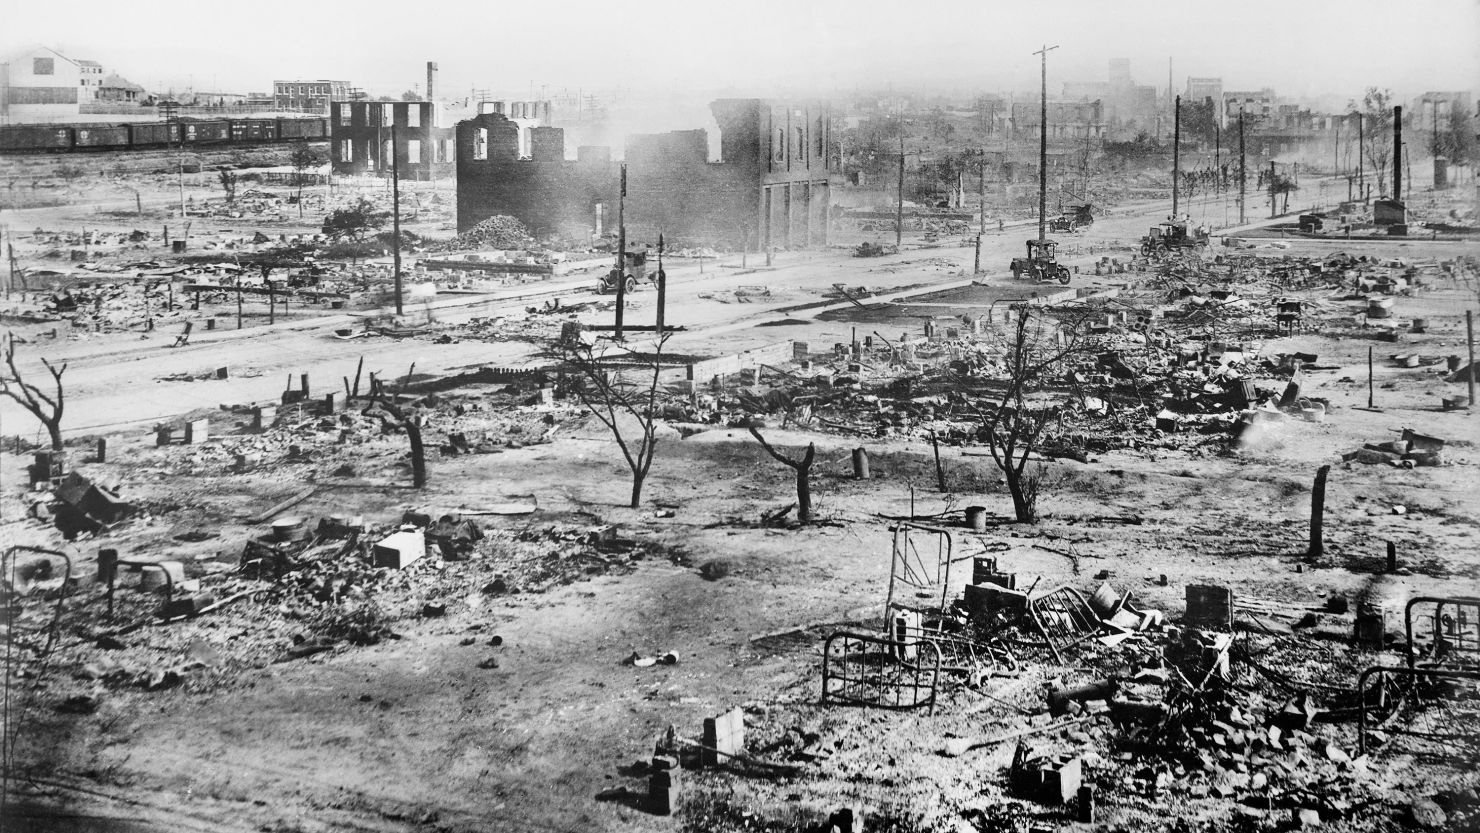 Tulsa, Oklahoma's Greenwood District smolders after the 1921 race riots. 